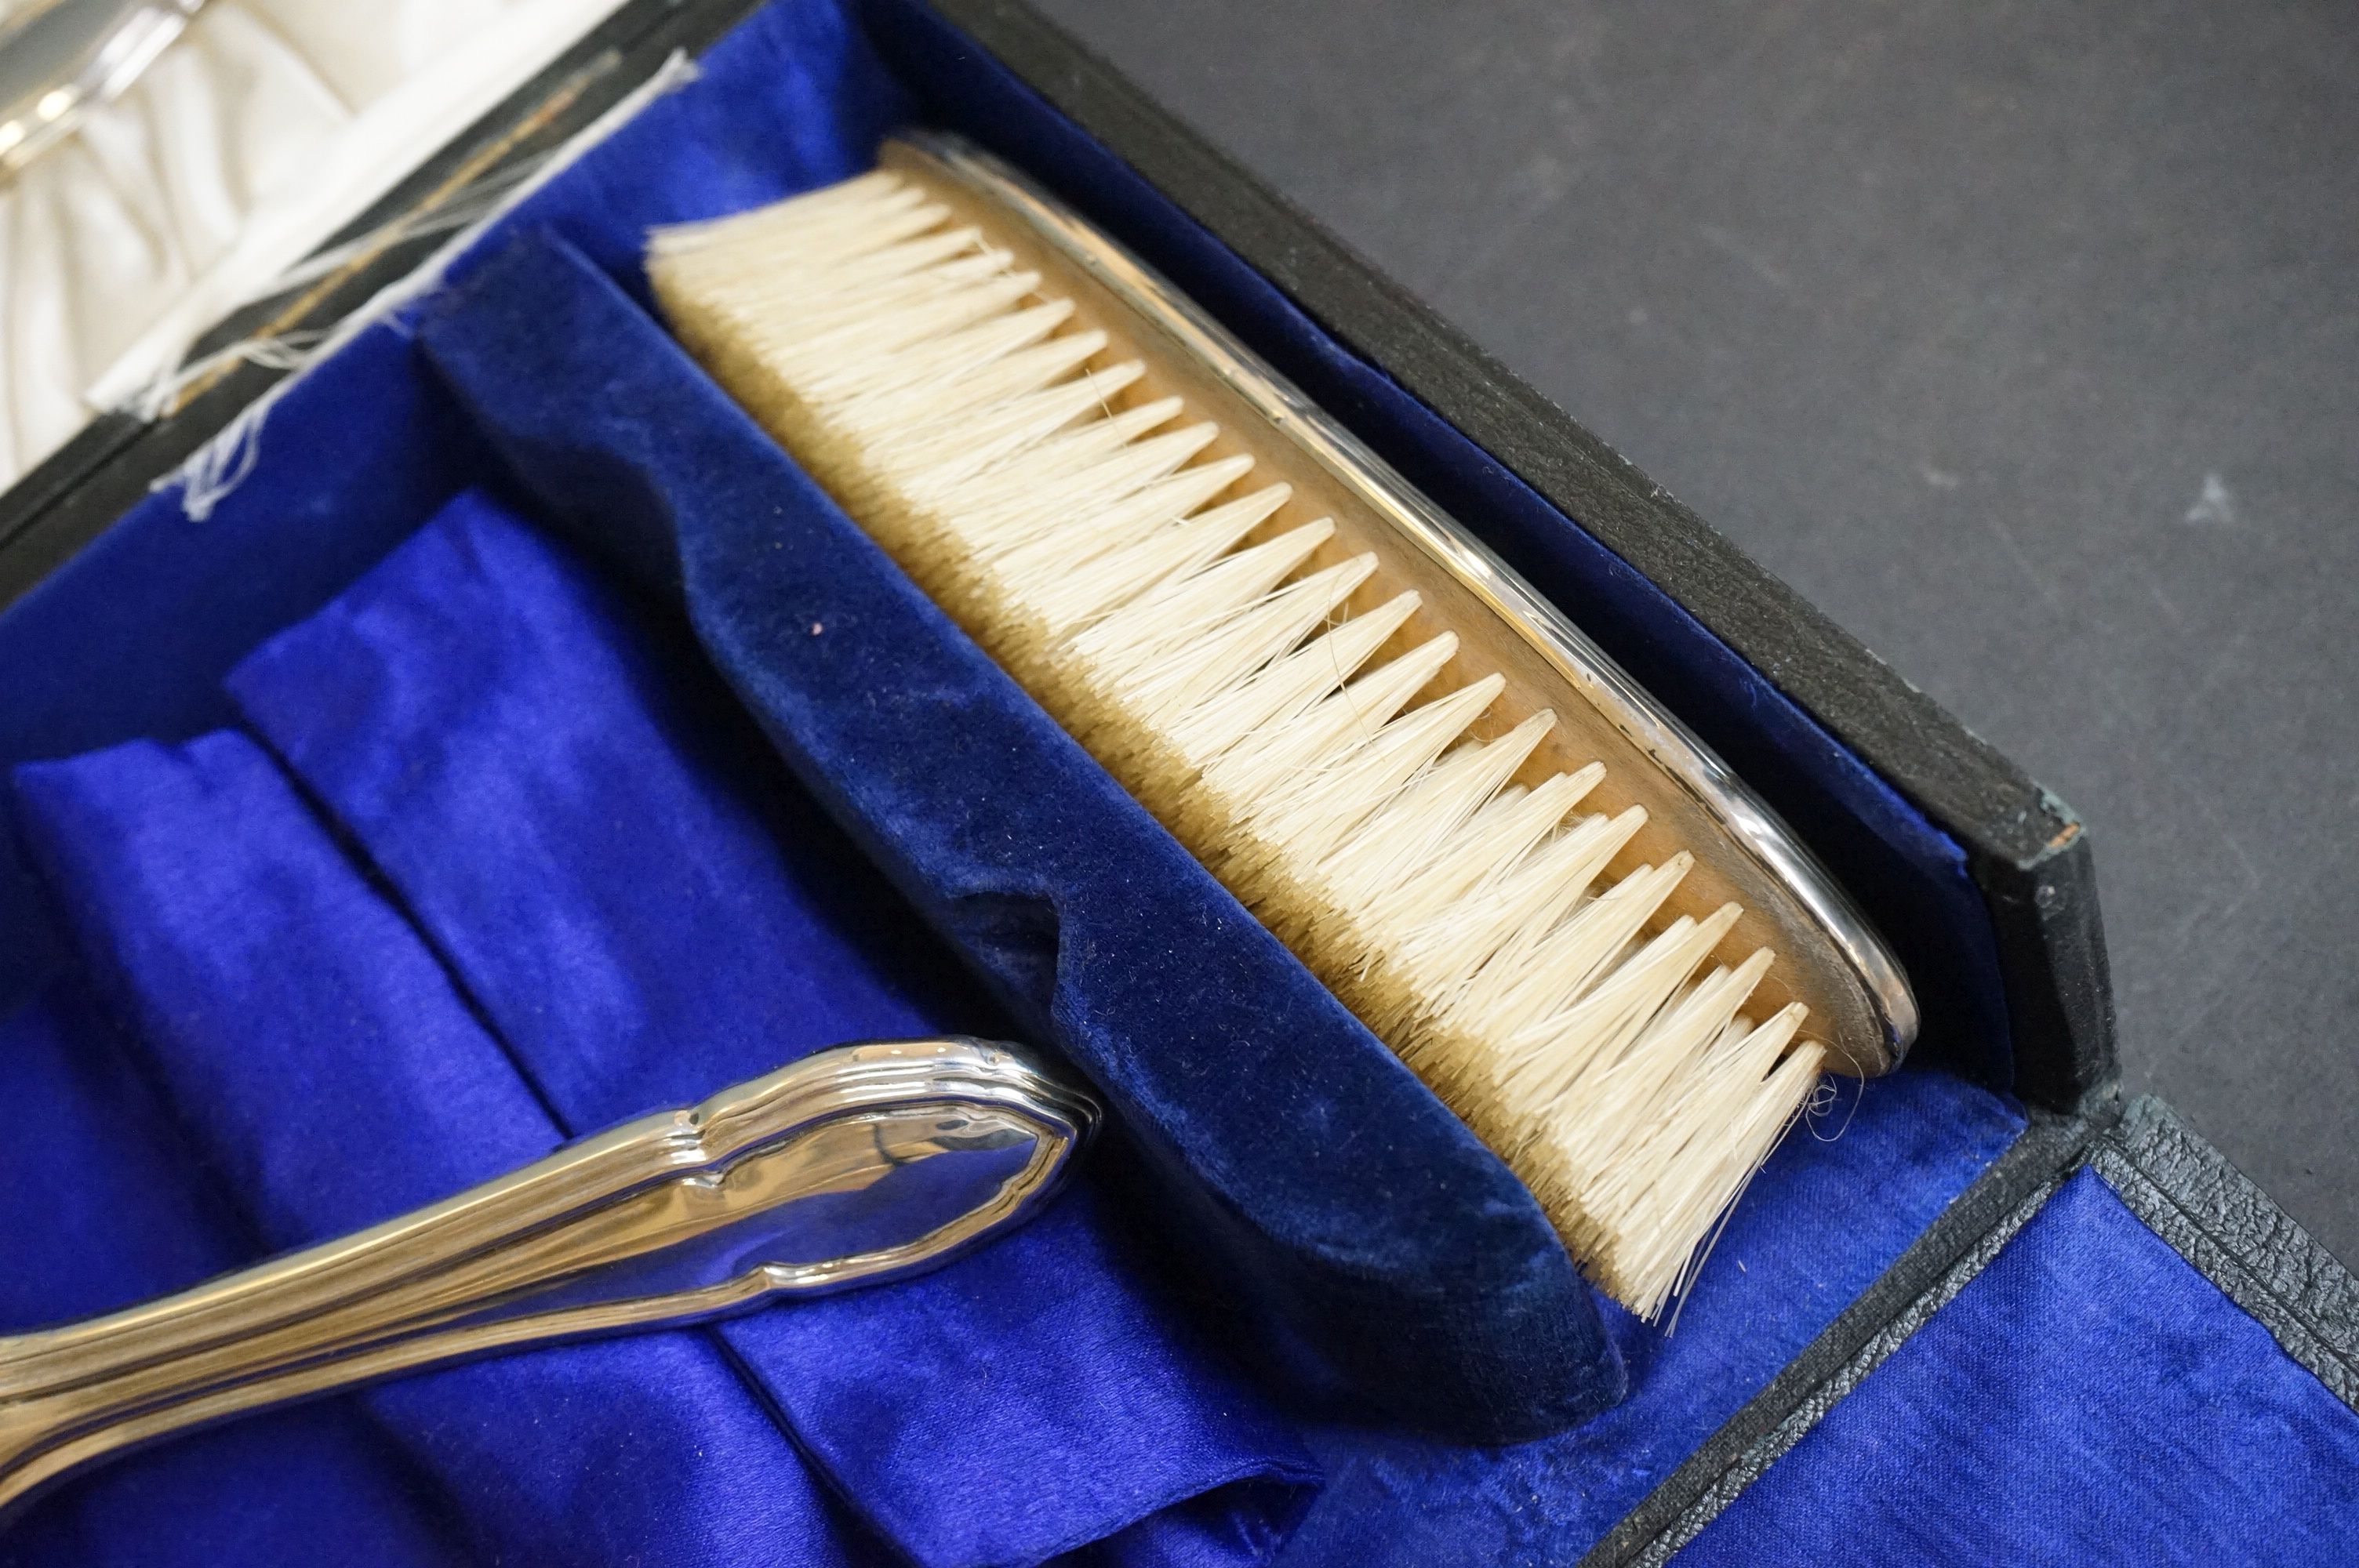 A Gorham Manufacturing Co sterling silver vanity brush & mirror set in original fitted box - Image 5 of 9